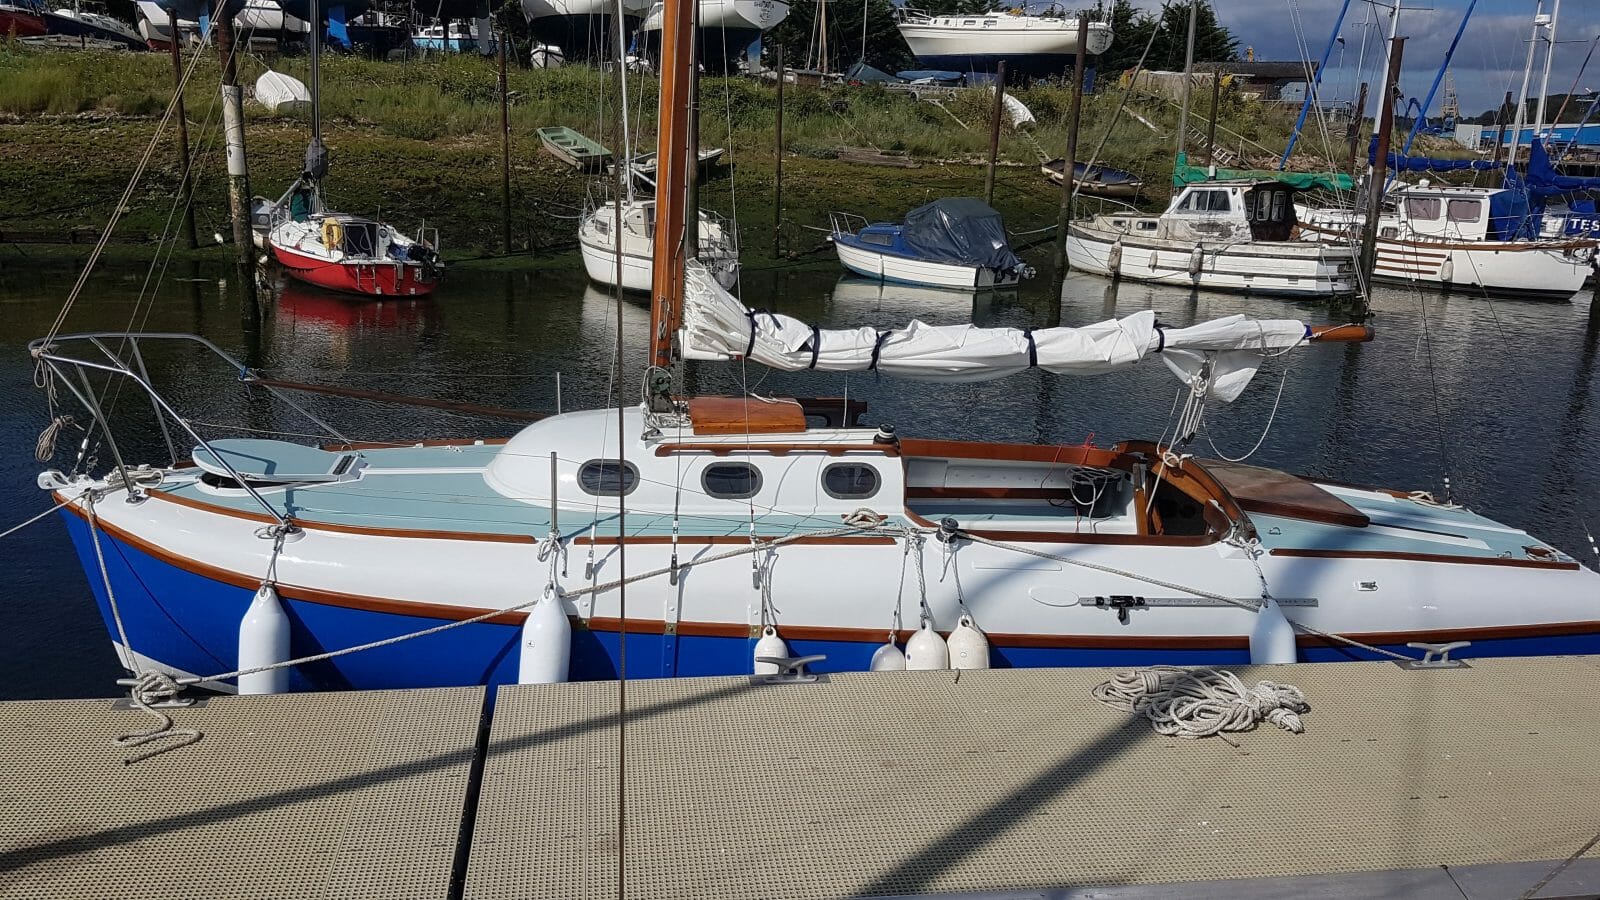 The hull and decks are in good, but not perfect, condition - port side